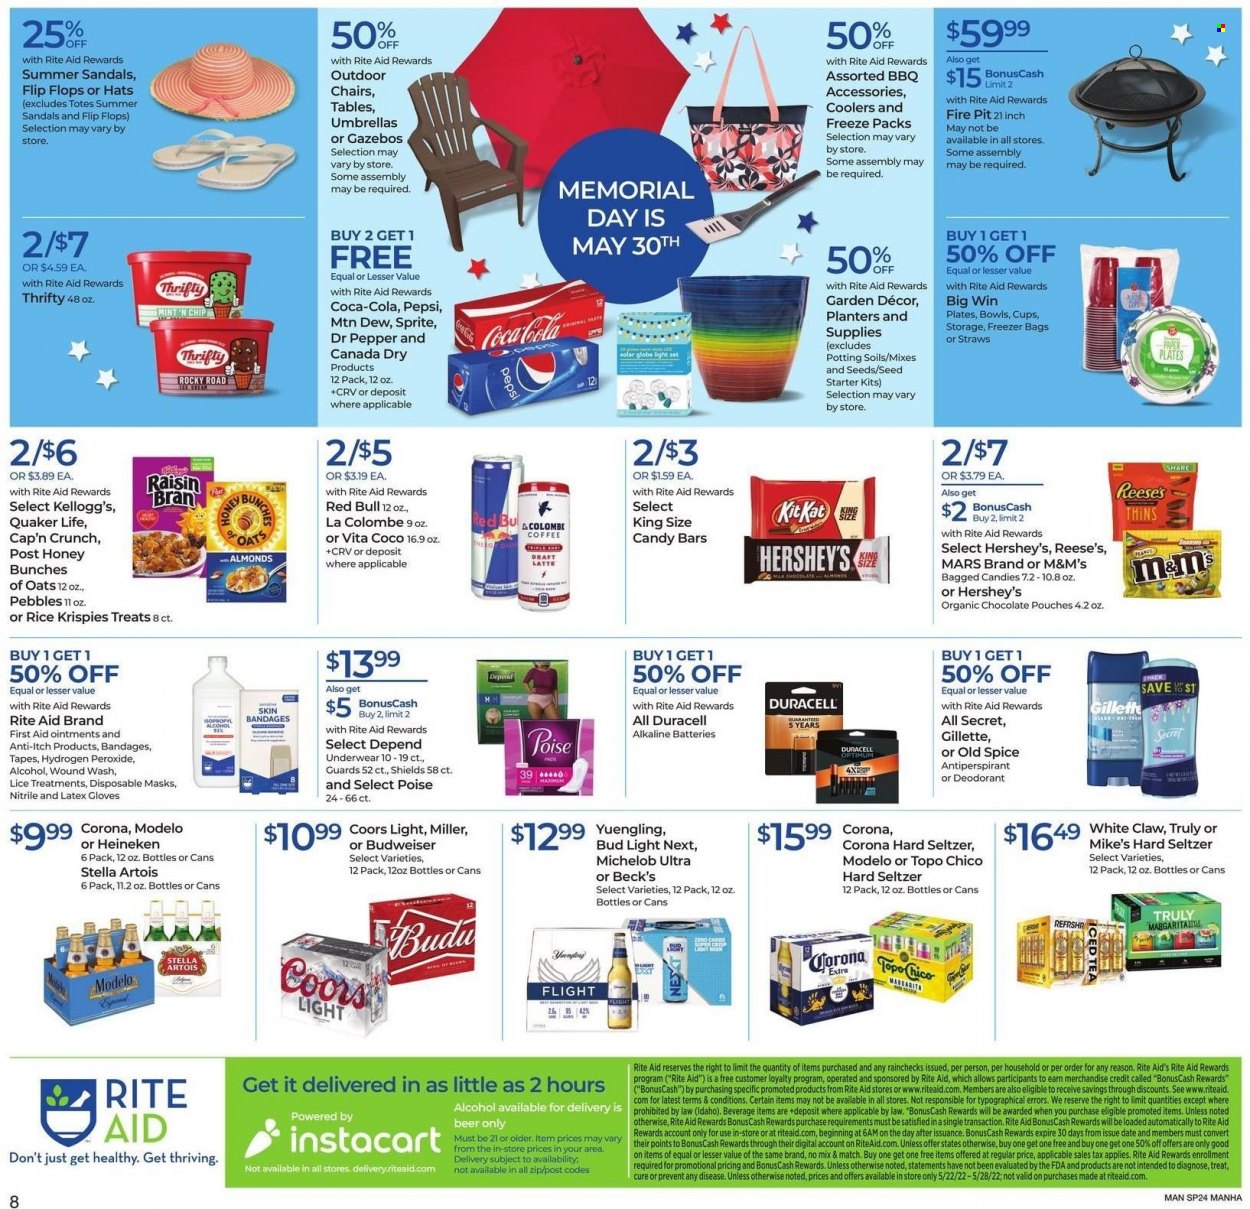 thumbnail - RITE AID Flyer - 05/22/2022 - 05/28/2022 - Sales products - sandals, flip flops, Quaker, Reese's, Hershey's, chocolate, Mars, KitKat, M&M's, Kellogg's, Thins, Rice Krispies, Cap'n Crunch, spice, honey, almonds, Planters, Canada Dry, Coca-Cola, Mountain Dew, Sprite, Pepsi, Dr. Pepper, Red Bull, coffee, alcohol, White Claw, Hard Seltzer, TRULY, beer, Bud Light, Corona Extra, Heineken, Miller, Beck's, Modelo, Old Spice, anti-perspirant, deodorant, Gillette, plate, cup, straw, freezer bag, Duracell, alkaline batteries, plant seeds, Optimum, tote, gloves, hat, bunches, latex gloves, Budweiser, Stella Artois, Coors, Yuengling, Michelob. Page 2.